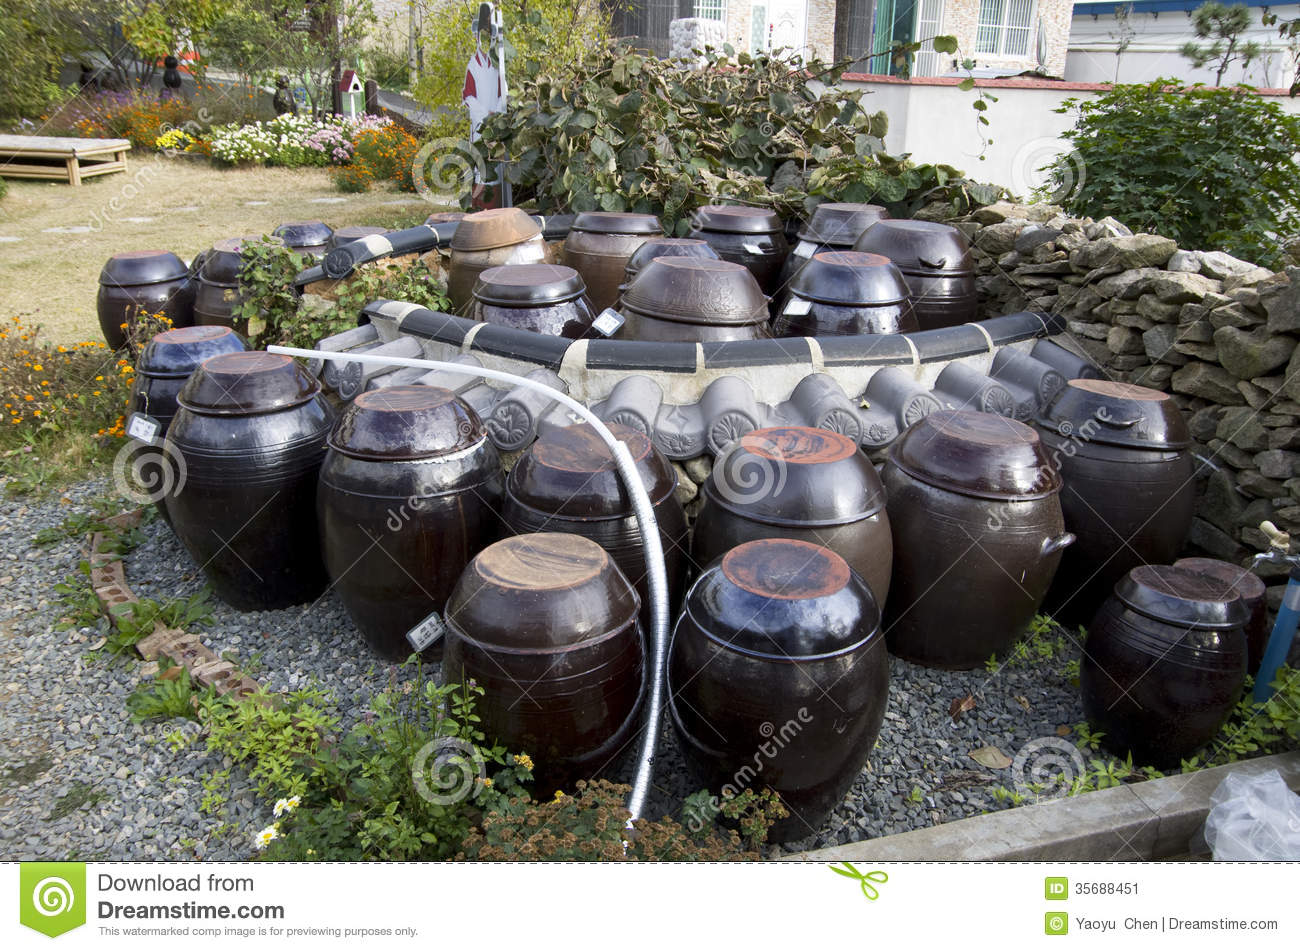 These Jars Were The Traditional Vessels For The Fermentation Process